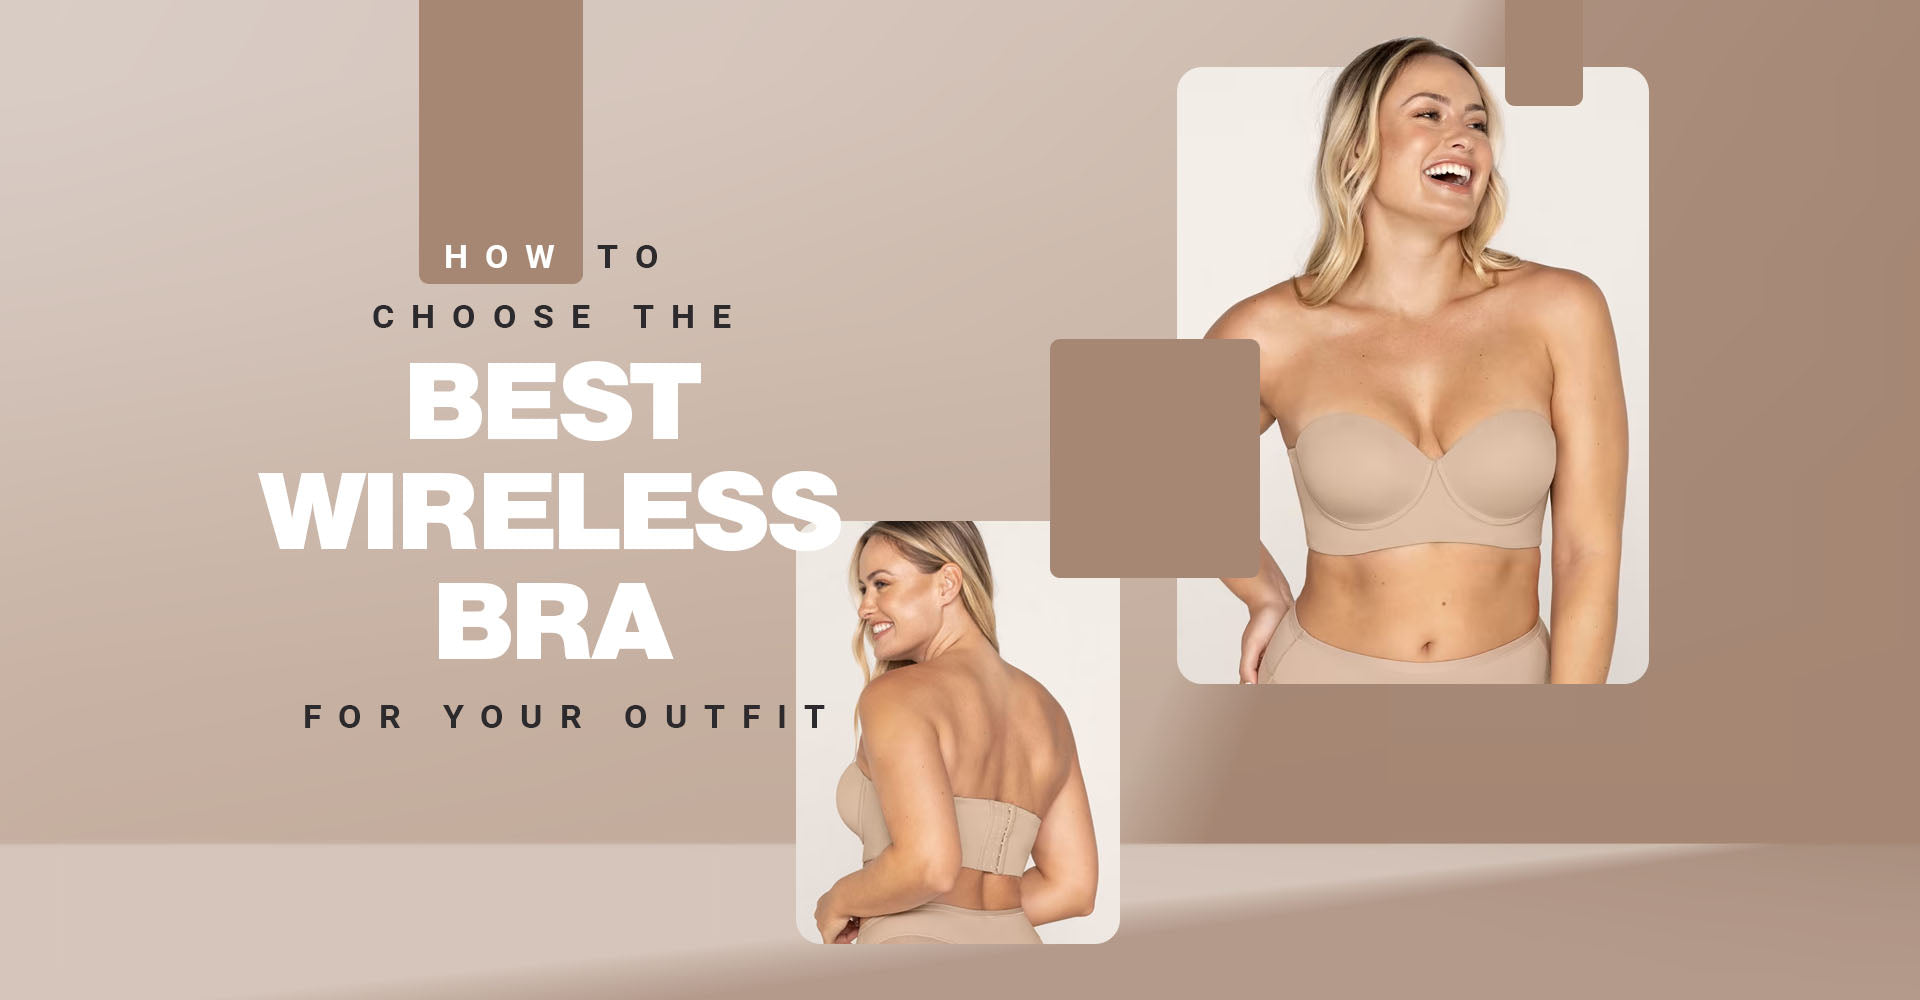 How To Choose the Best Wireless Bra for Your Outfit